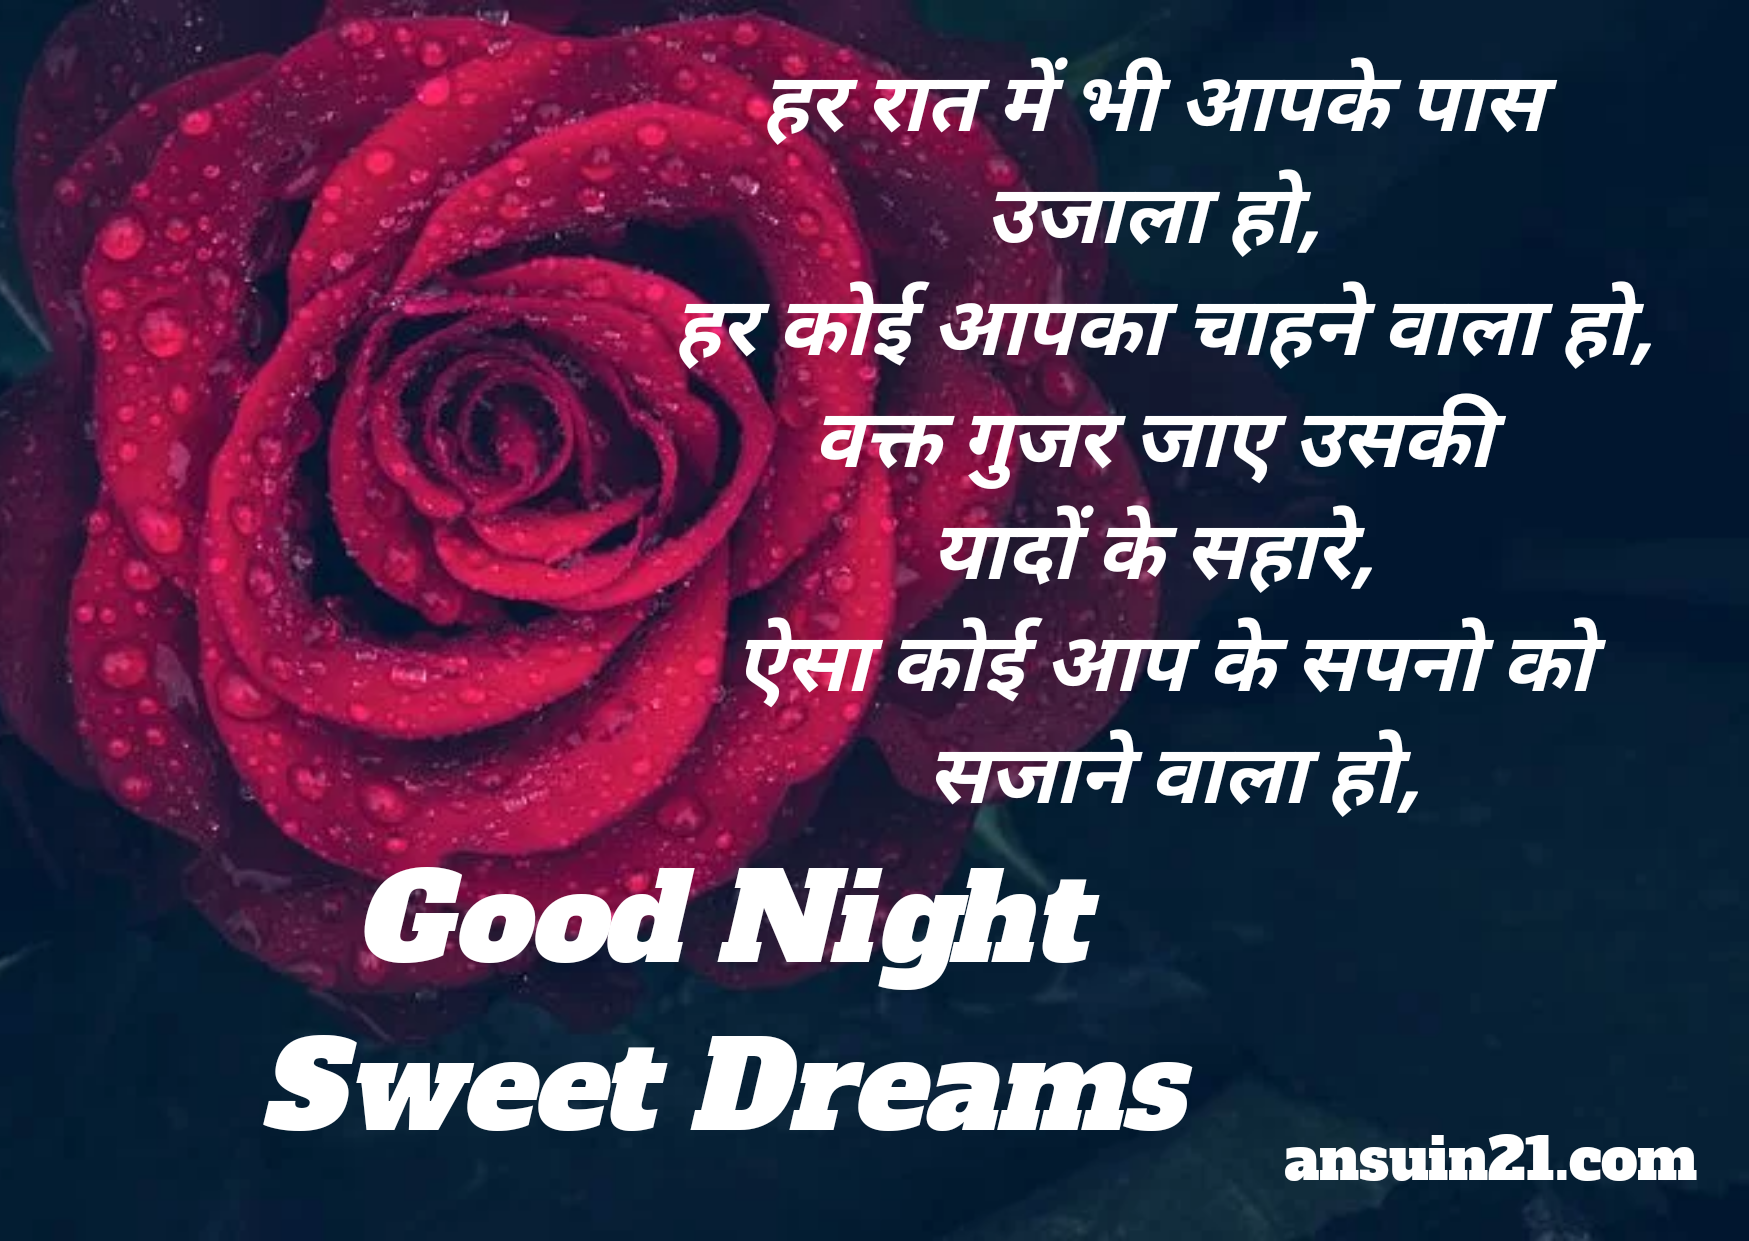 Best Good Night Hindi wishes, Status, sms, Images, best romantic good night hindi wishes, quotes, images,